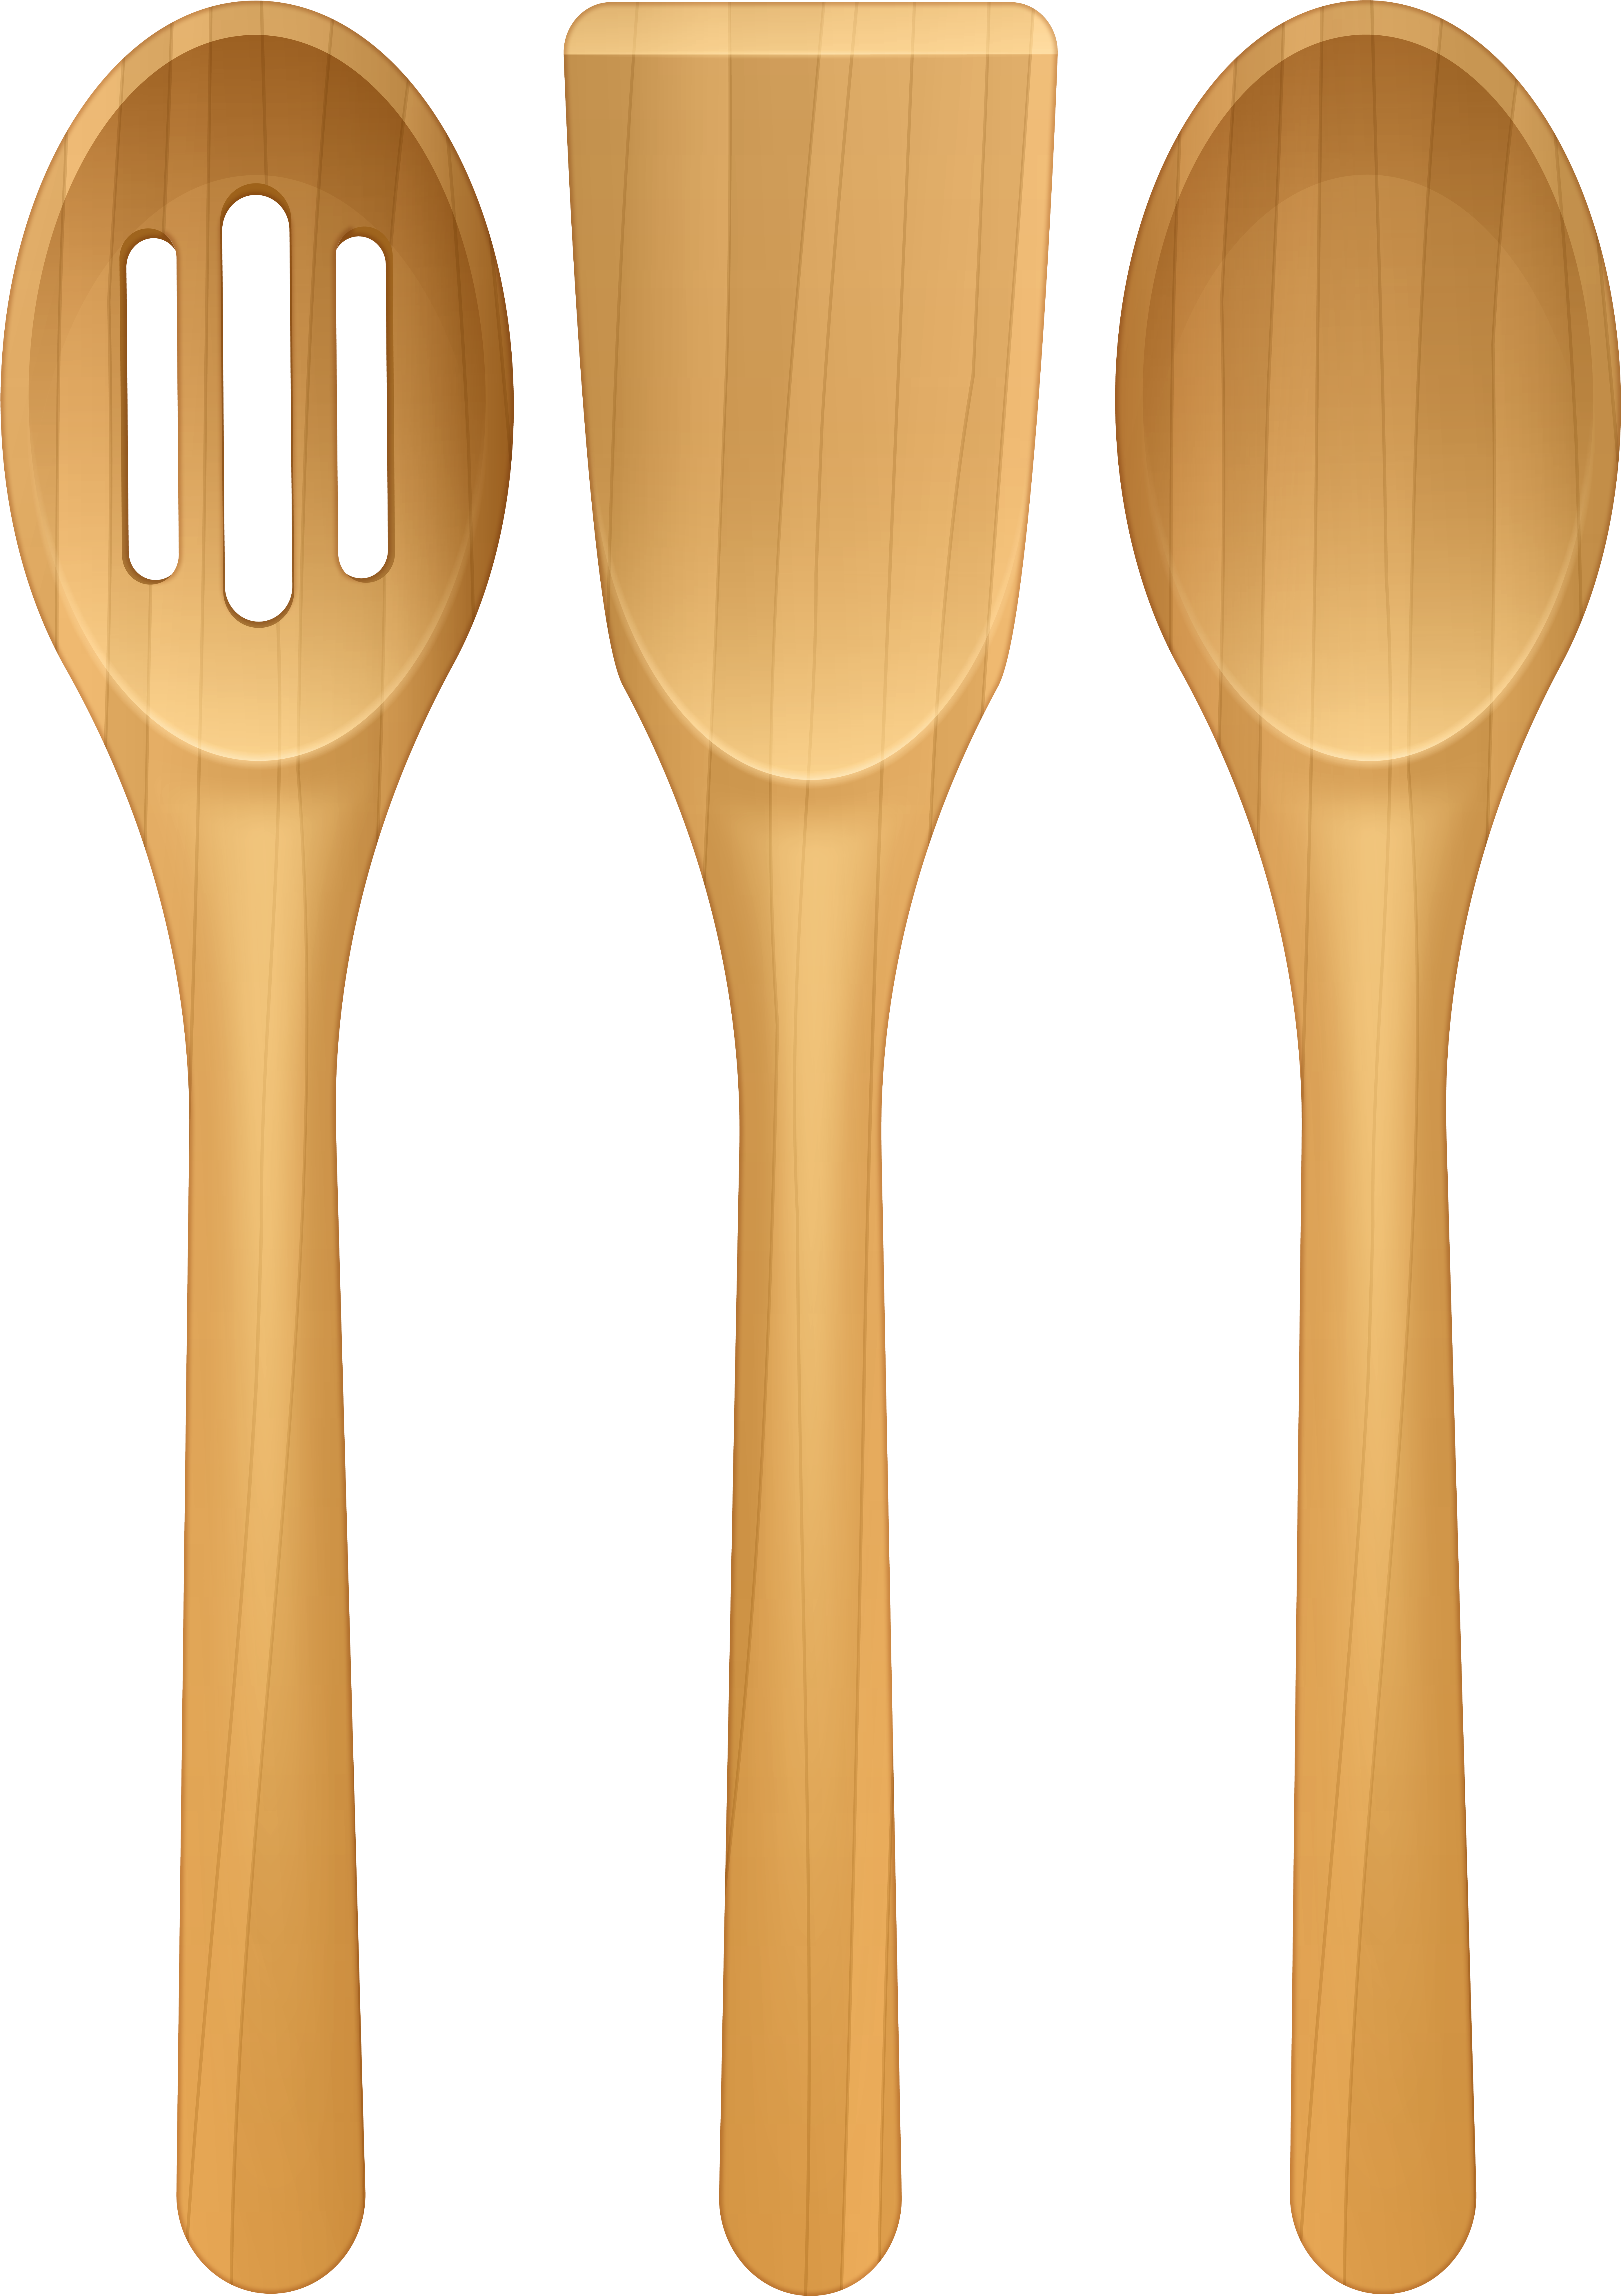 A Wooden Spoons With A Black Background